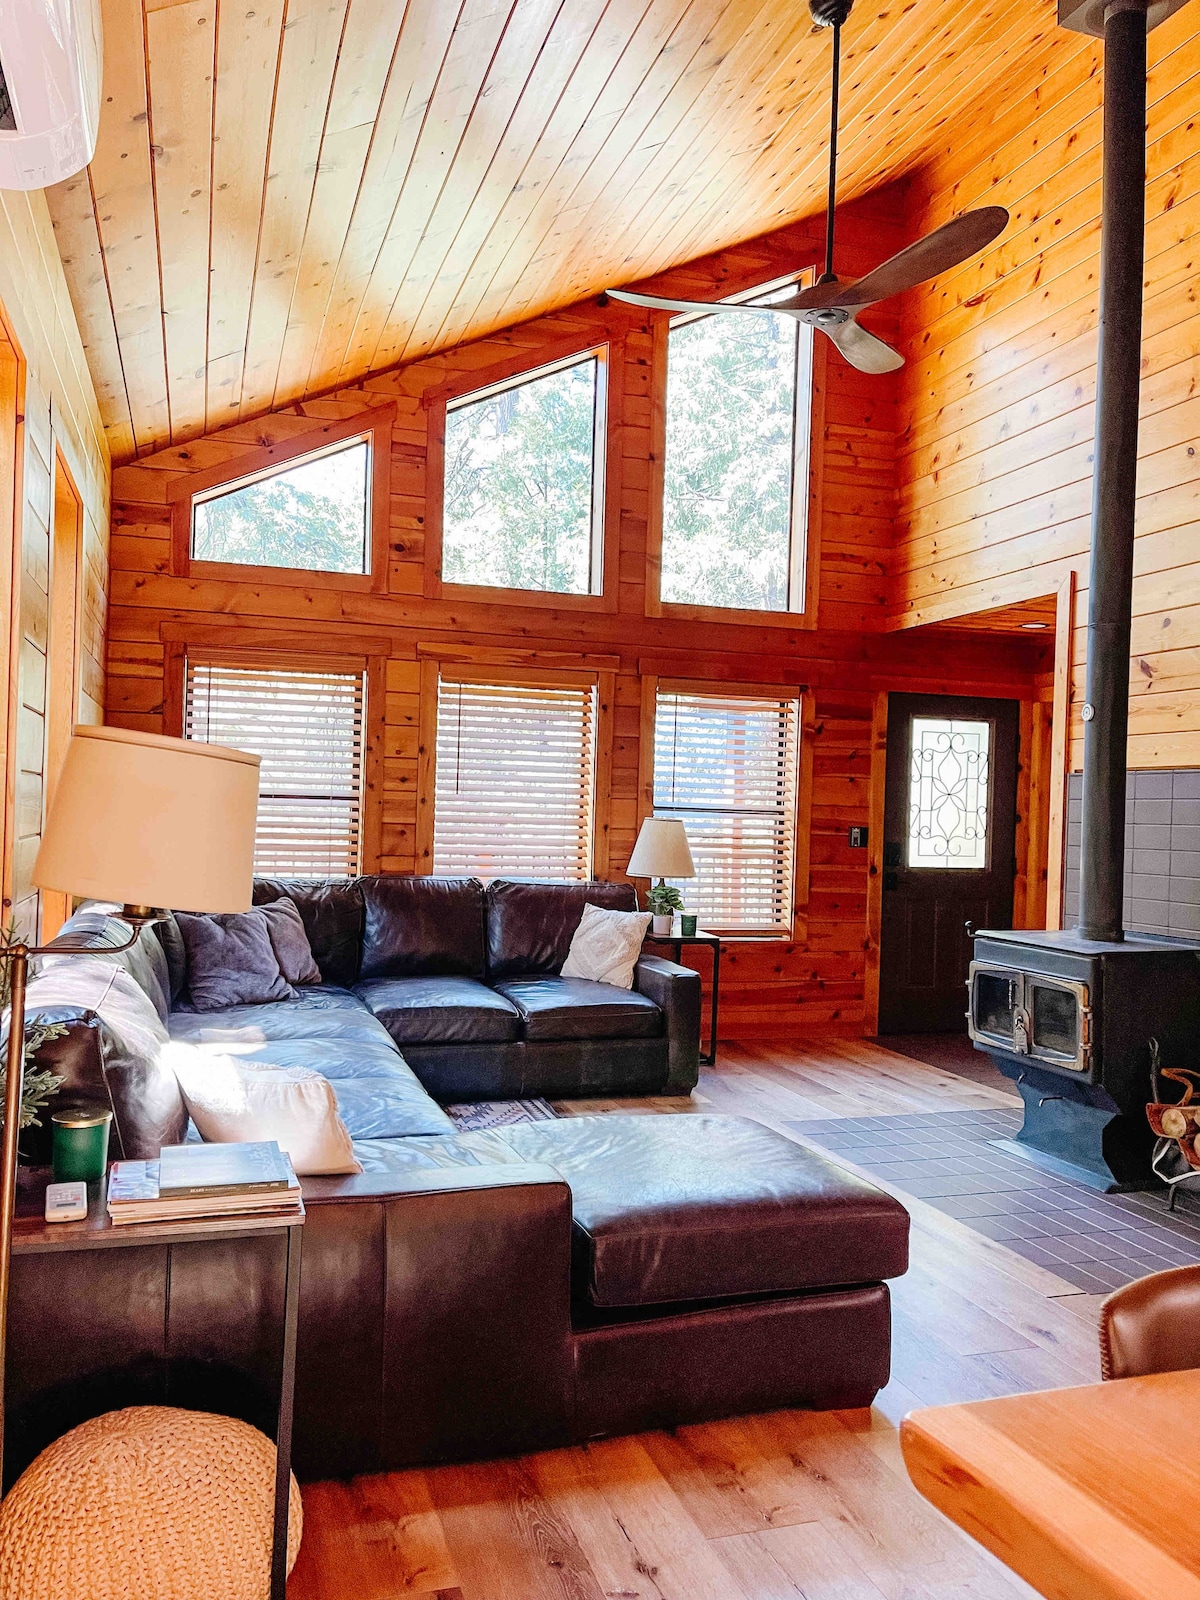 The Knotty Pine Lodge in Blue Lake Springs